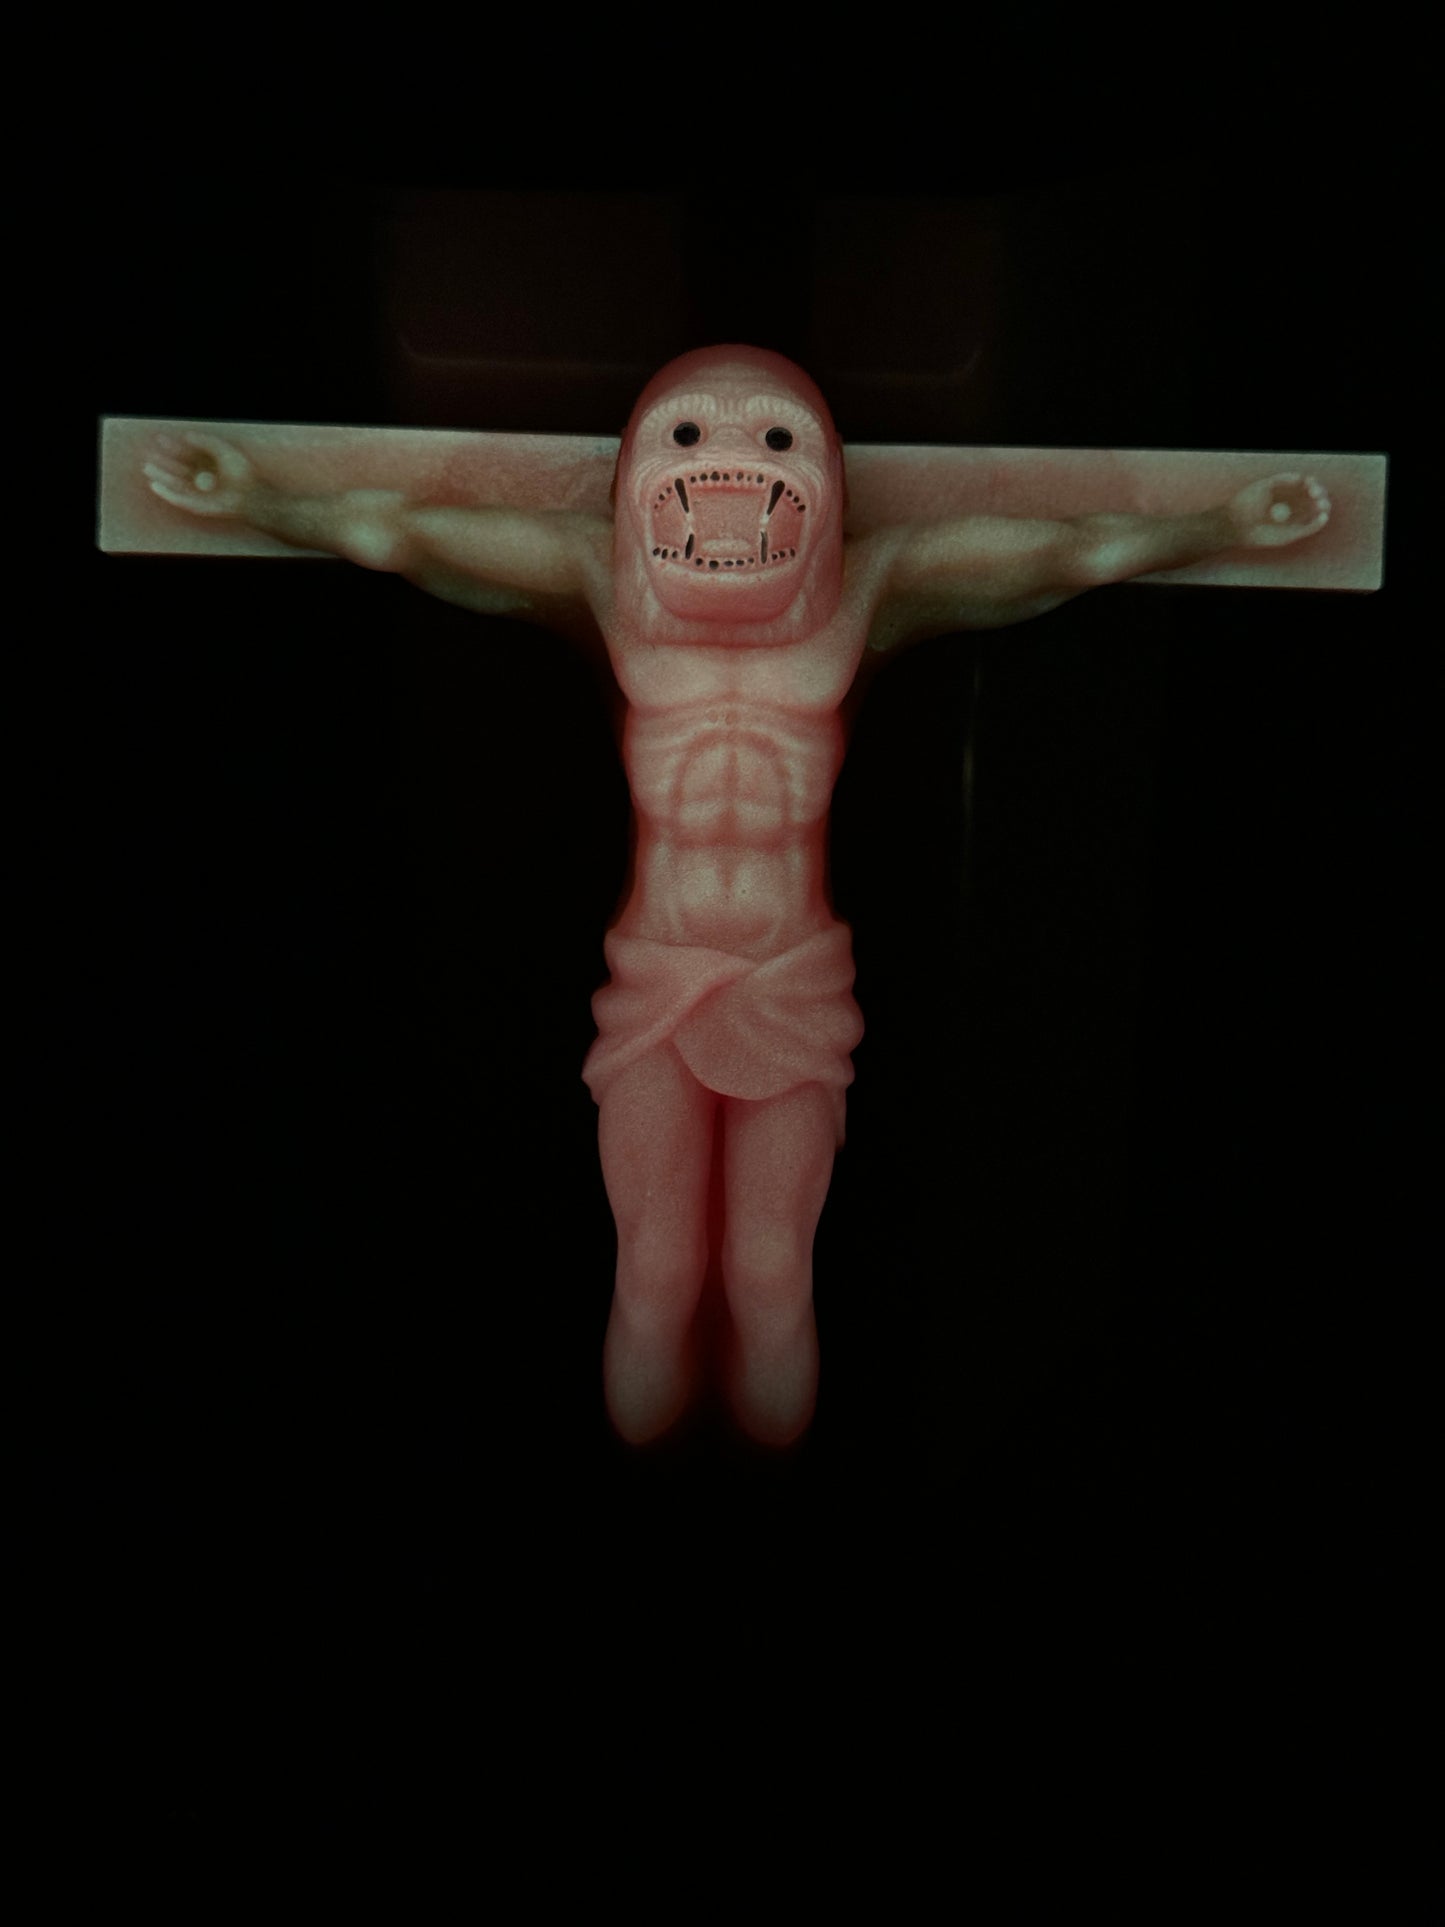 Christ on the Cross but he is an Ape, Magical Toy: Forever Young